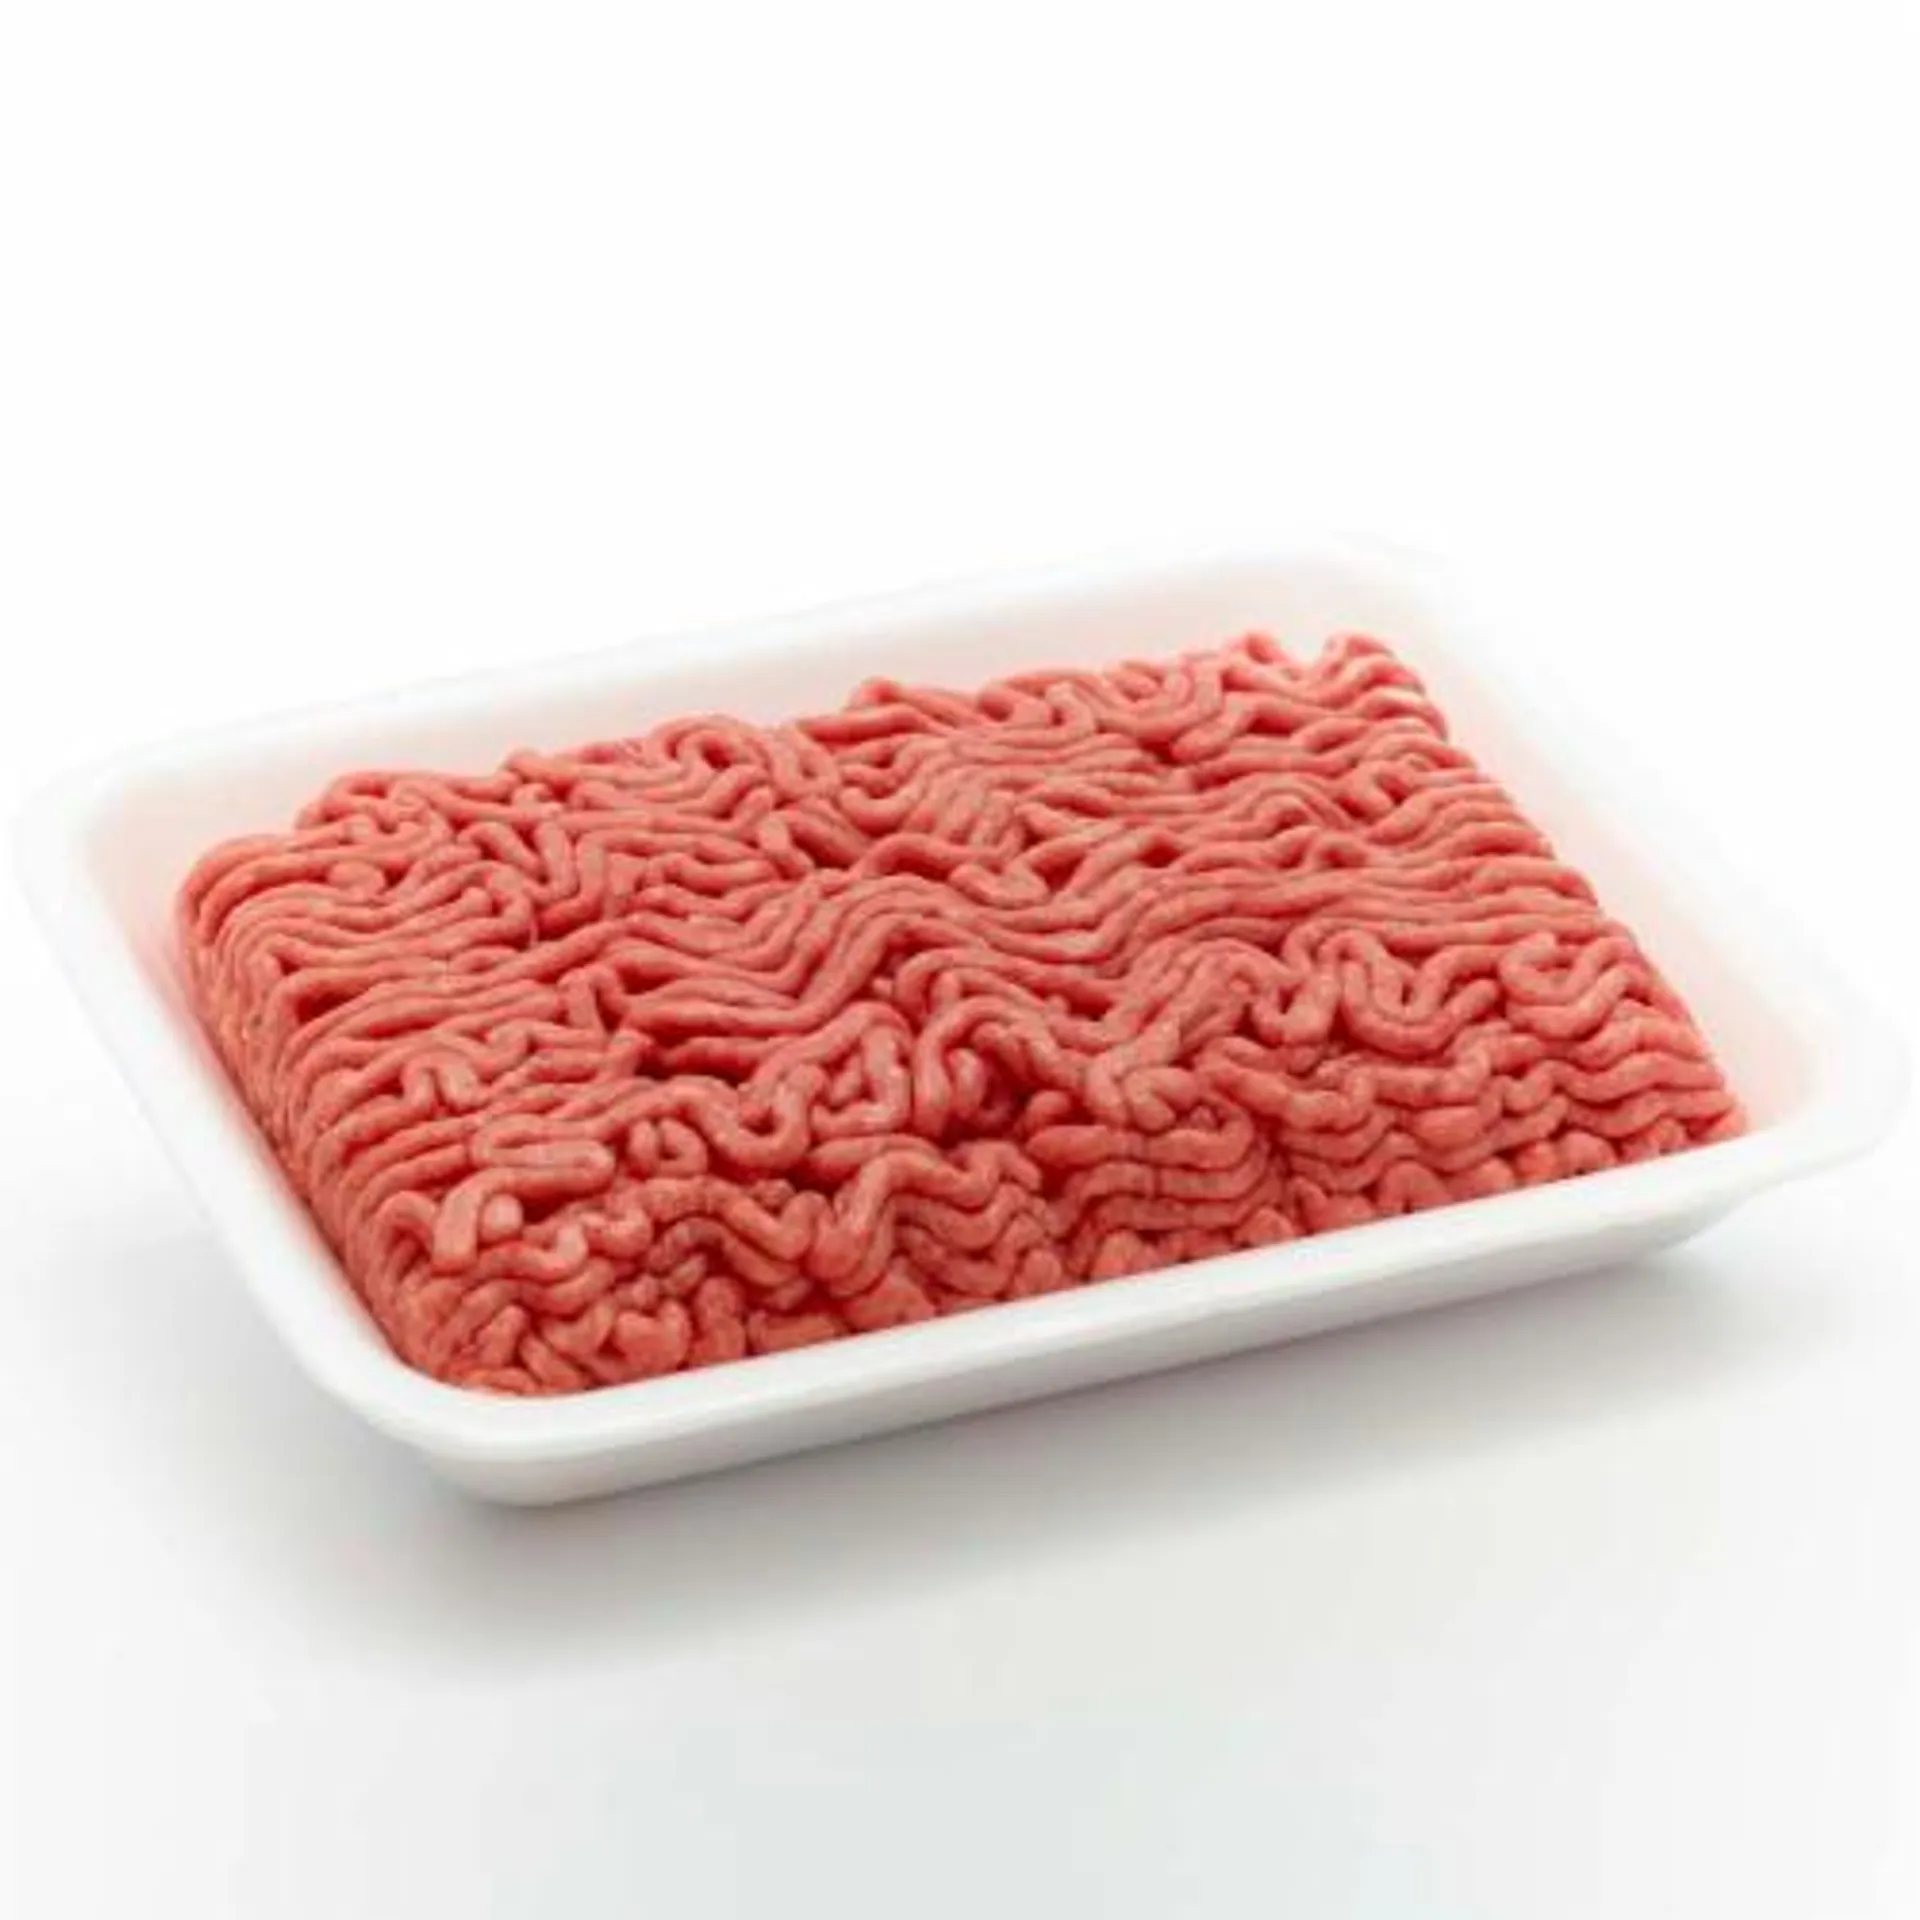 Private Selection™ 85/15 Lean Angus Ground Beef Value Pack